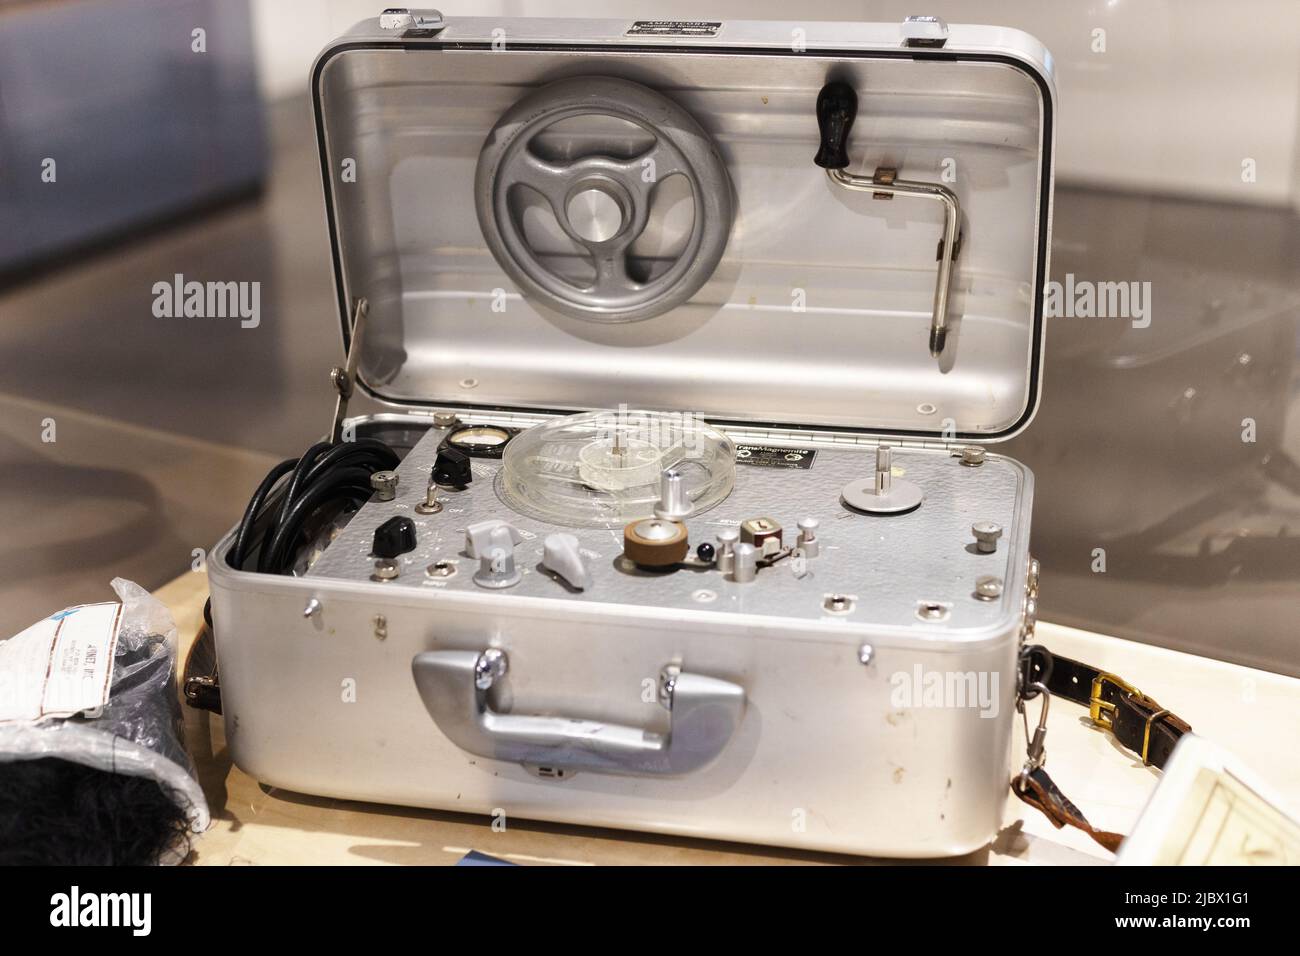 An Amplicorp magnemite audio recorder used in the 1950s by ornithologists to record bird calls. Stock Photo